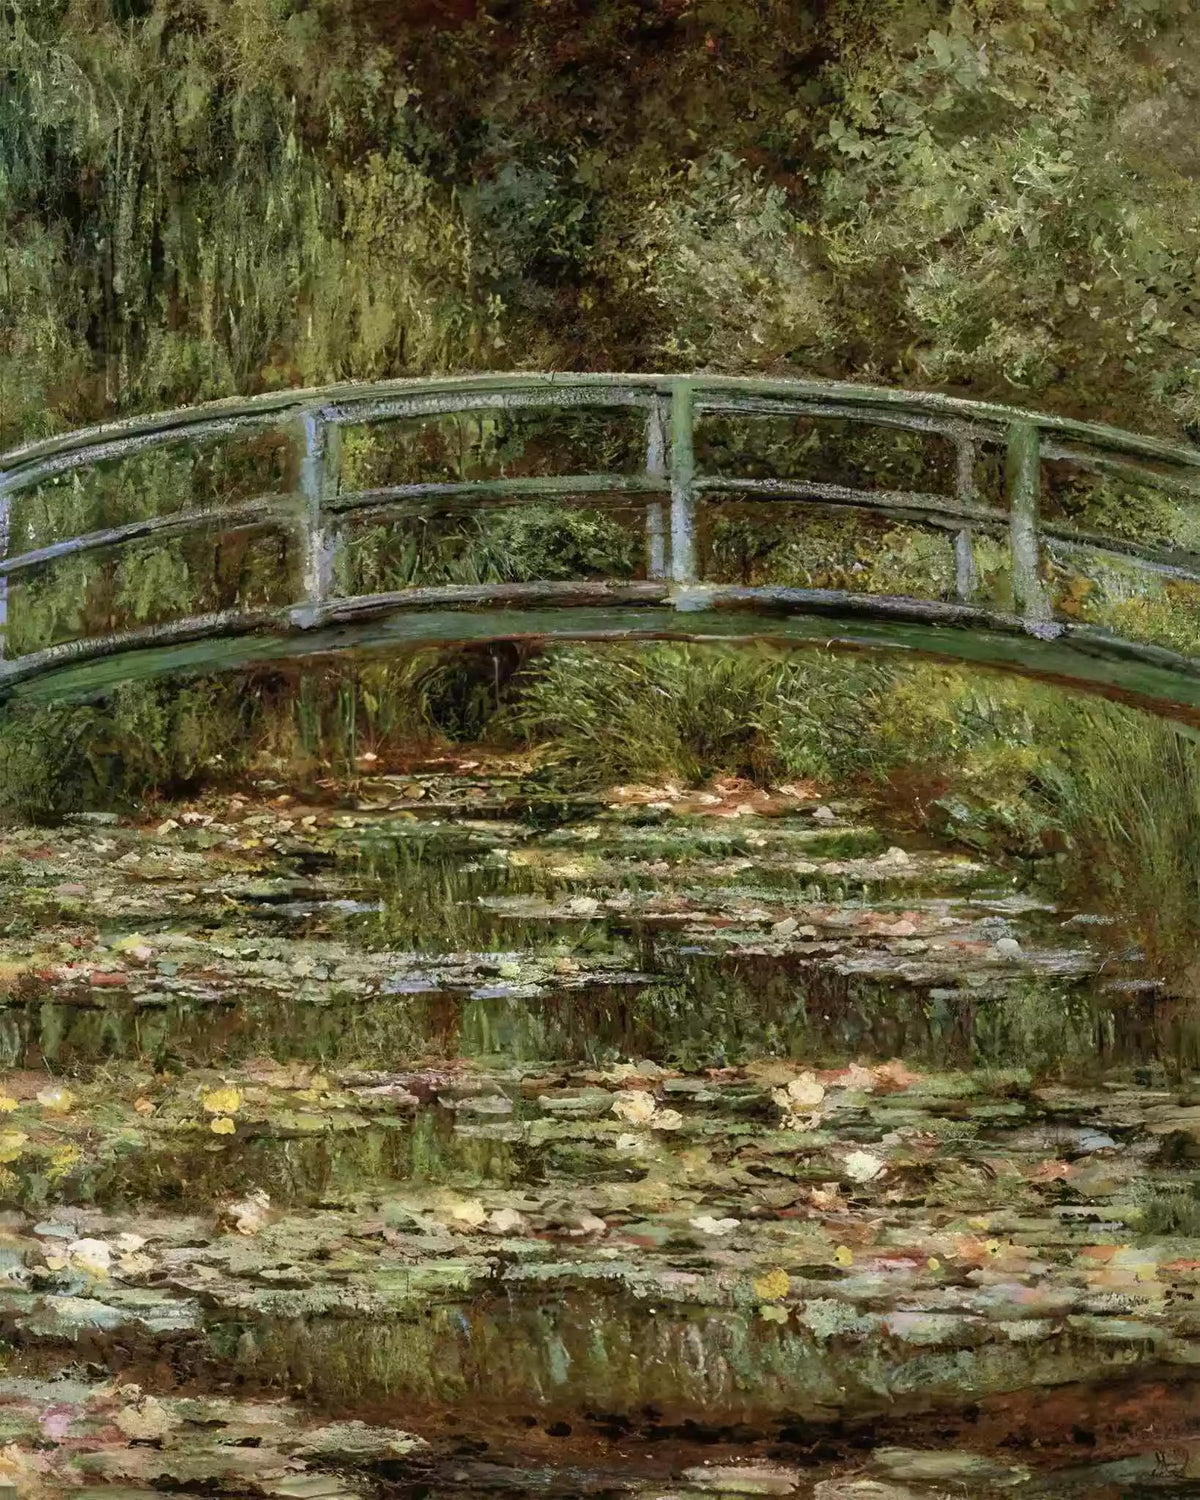 Bridge over a Pond of Water Lilies - Diamond Painting-Diamond Painting-16"x20" (40x50cm)-Canvas by Numbers US